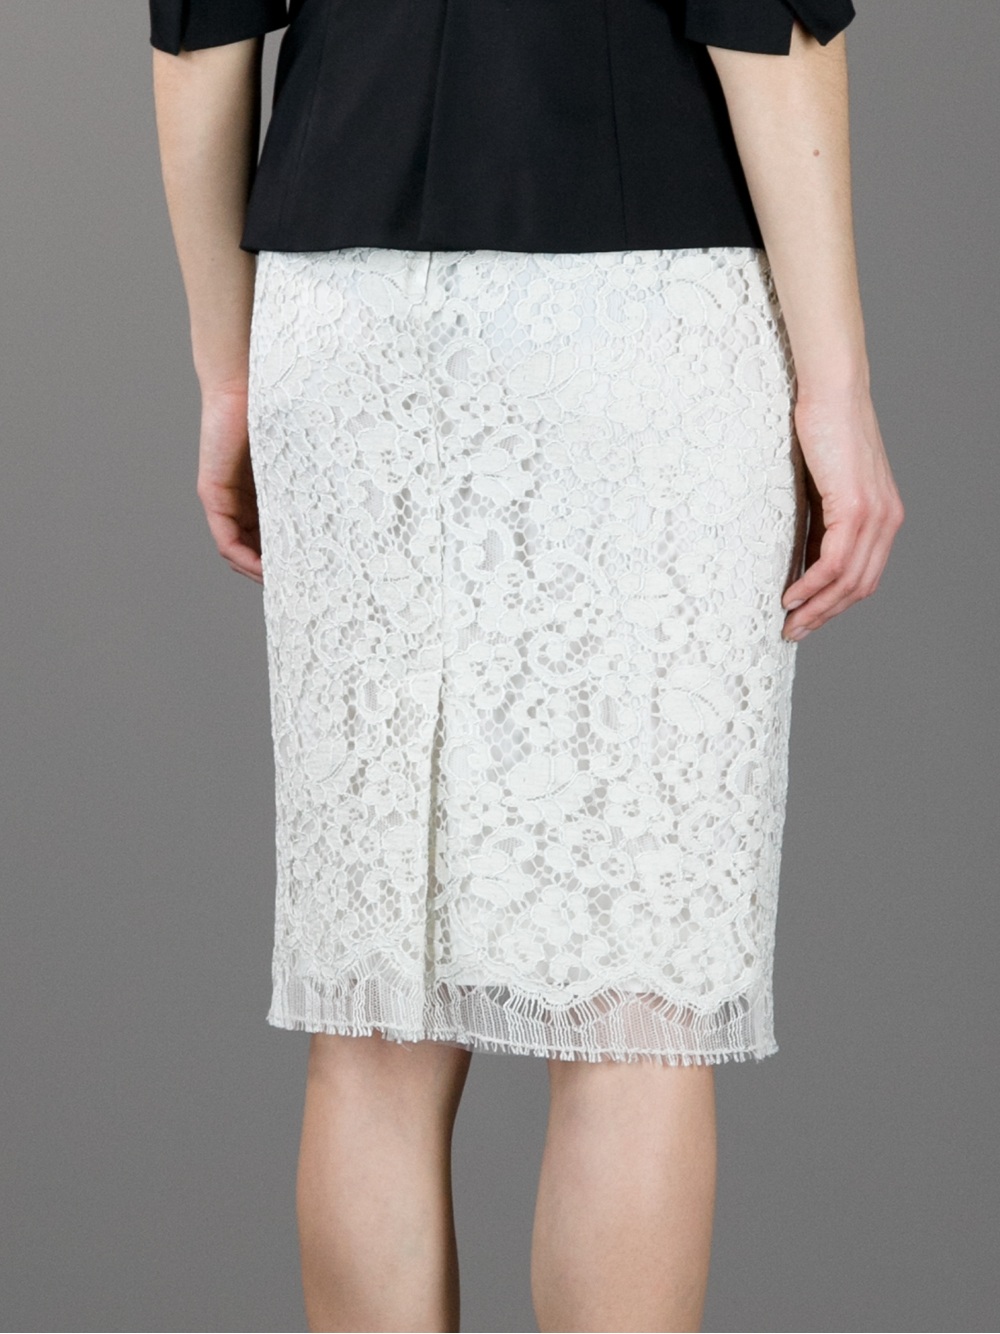 Lyst - Dolce & Gabbana Lace Skirt in White